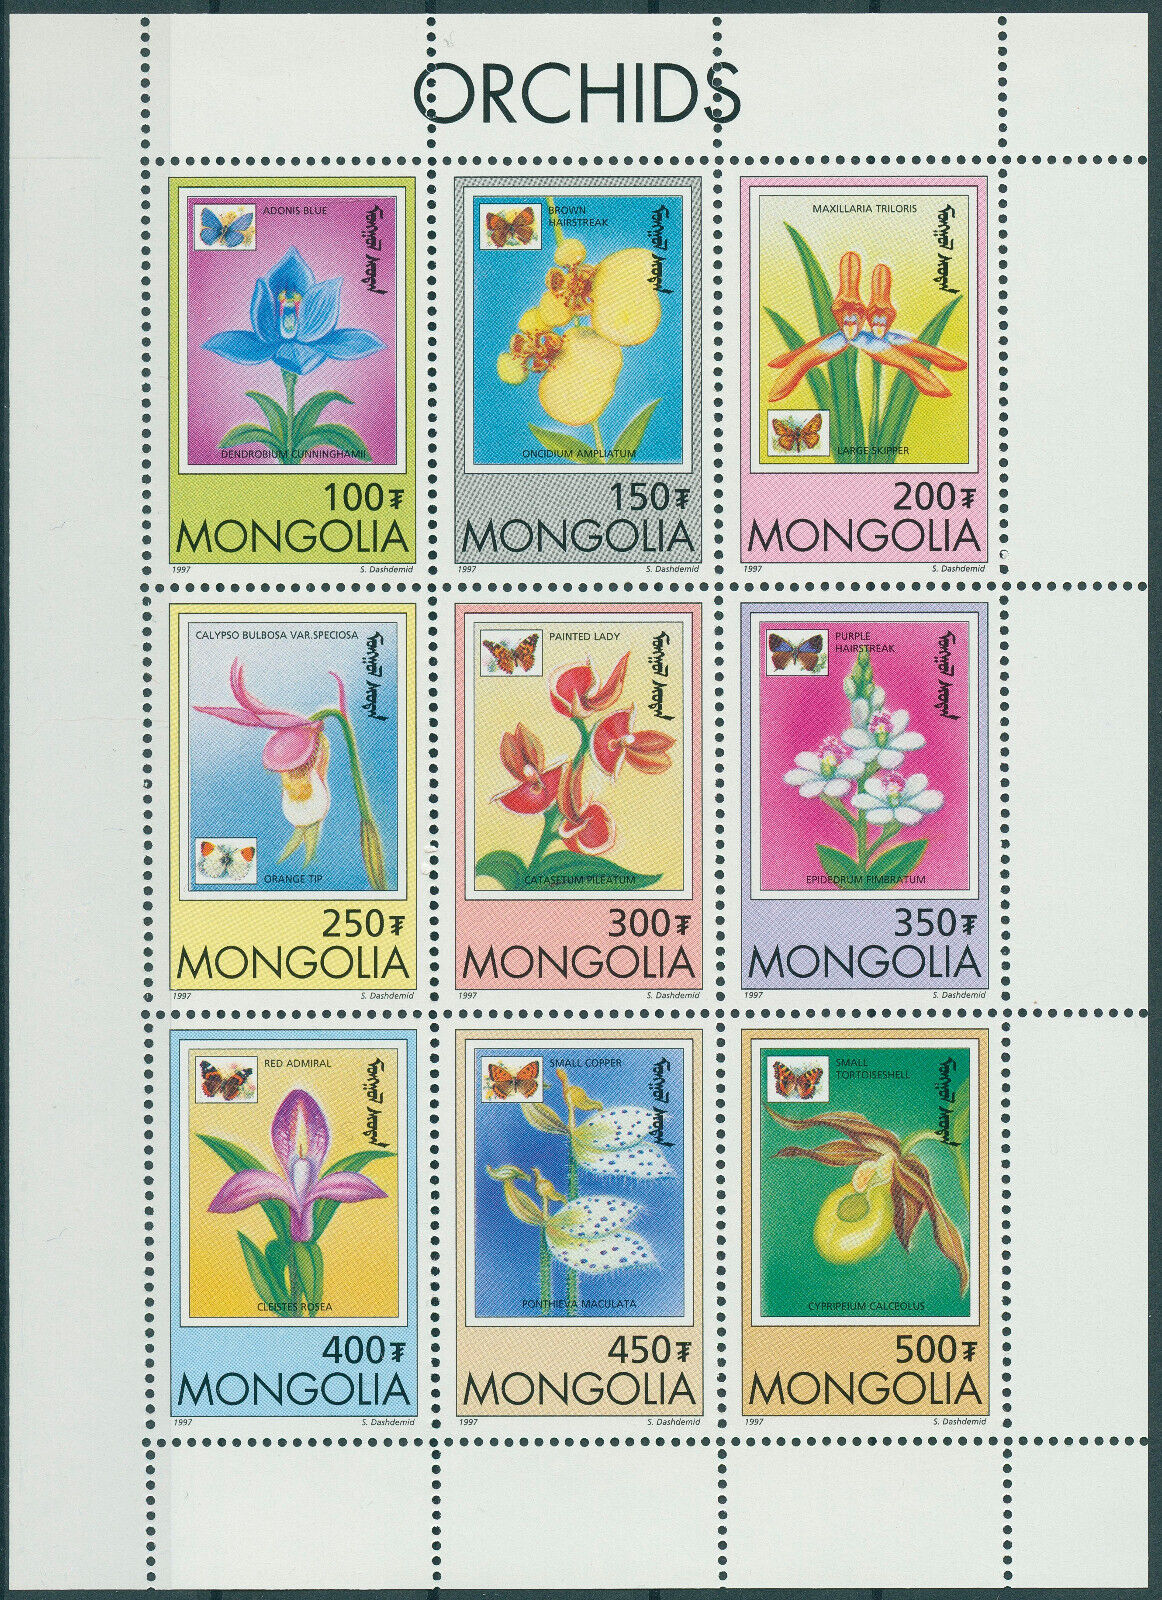 Mongolia 1997 MNH Orchids & Butterflies Stamps Flowers Butterfly Orchid 9v M/S